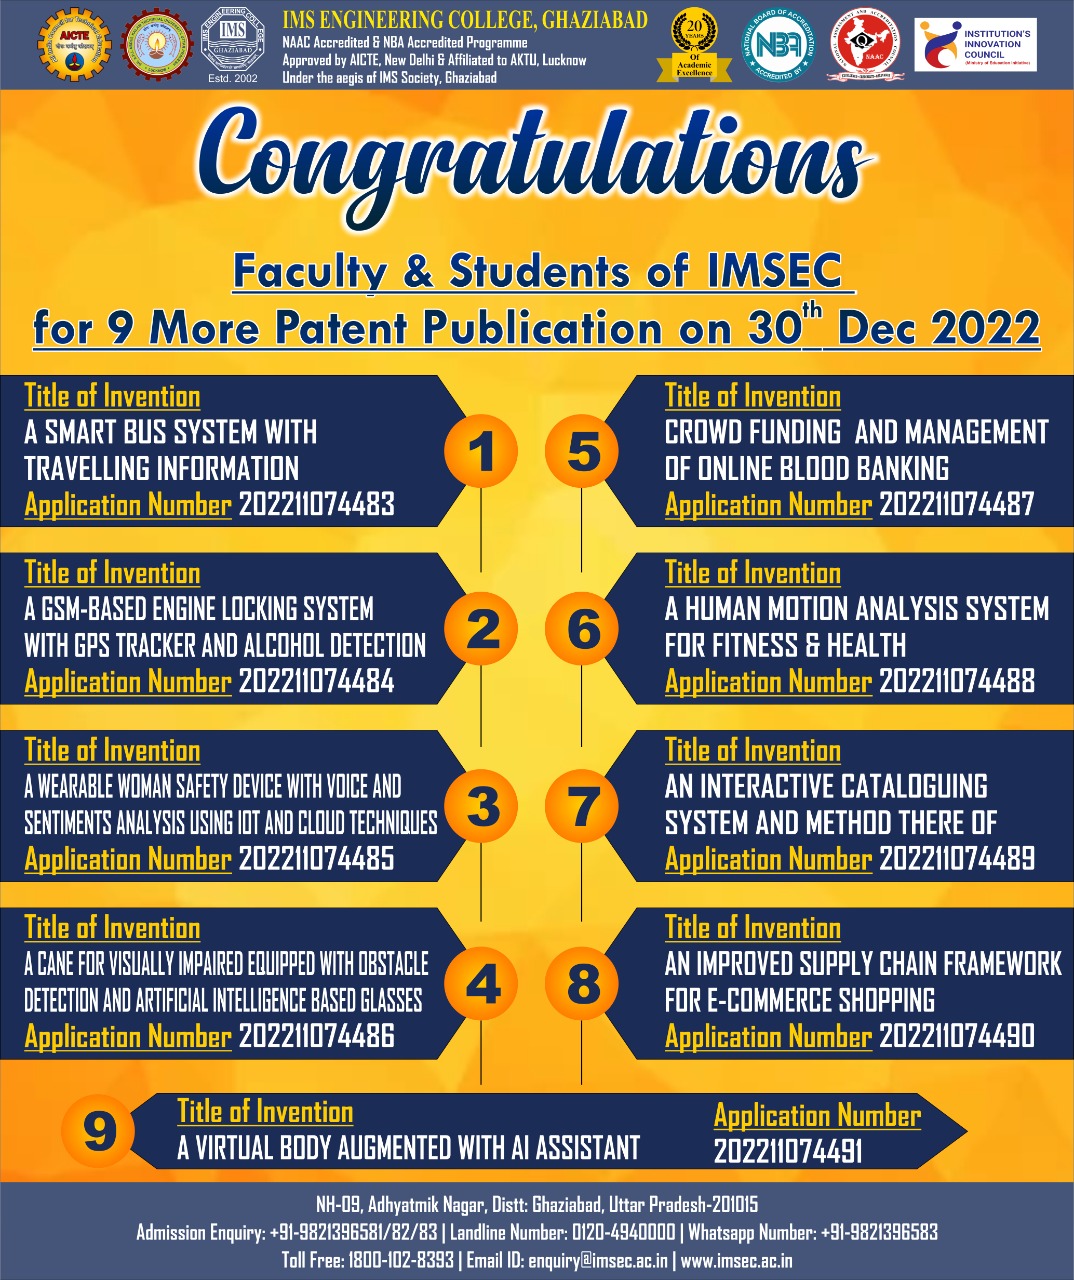 Congratulations to all Inventors for their Patent Publication on 30 Dec 2022